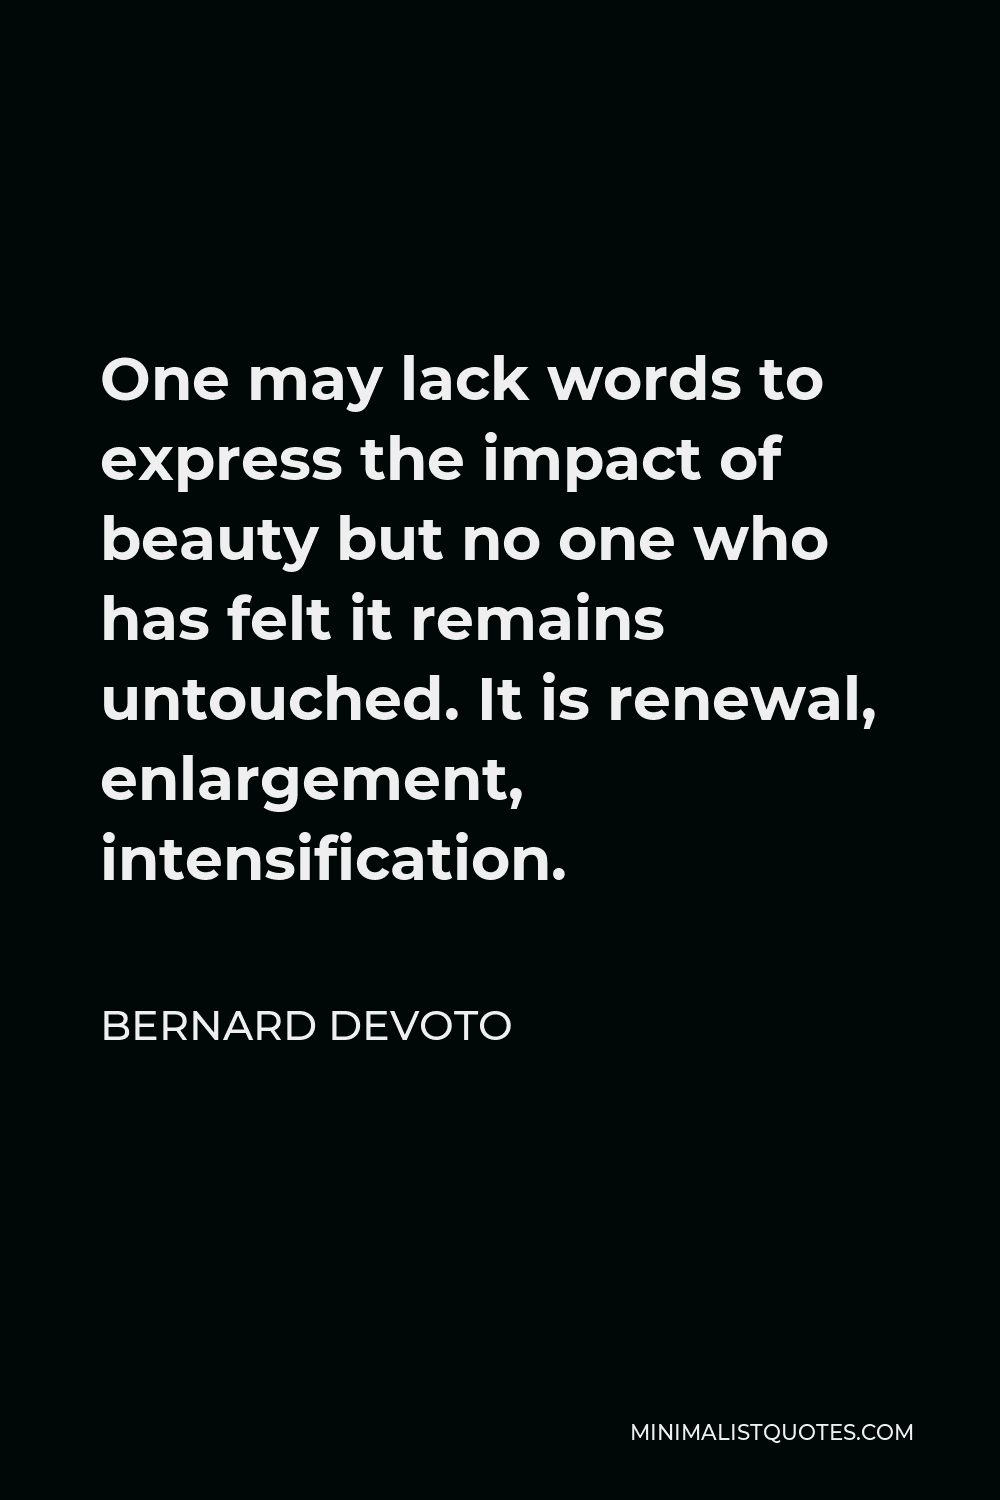 Bernard DeVoto Quote - One may lack words to express the impact of beauty but no one who has felt it remains untouched. It is renewal, enlargement, intensification.